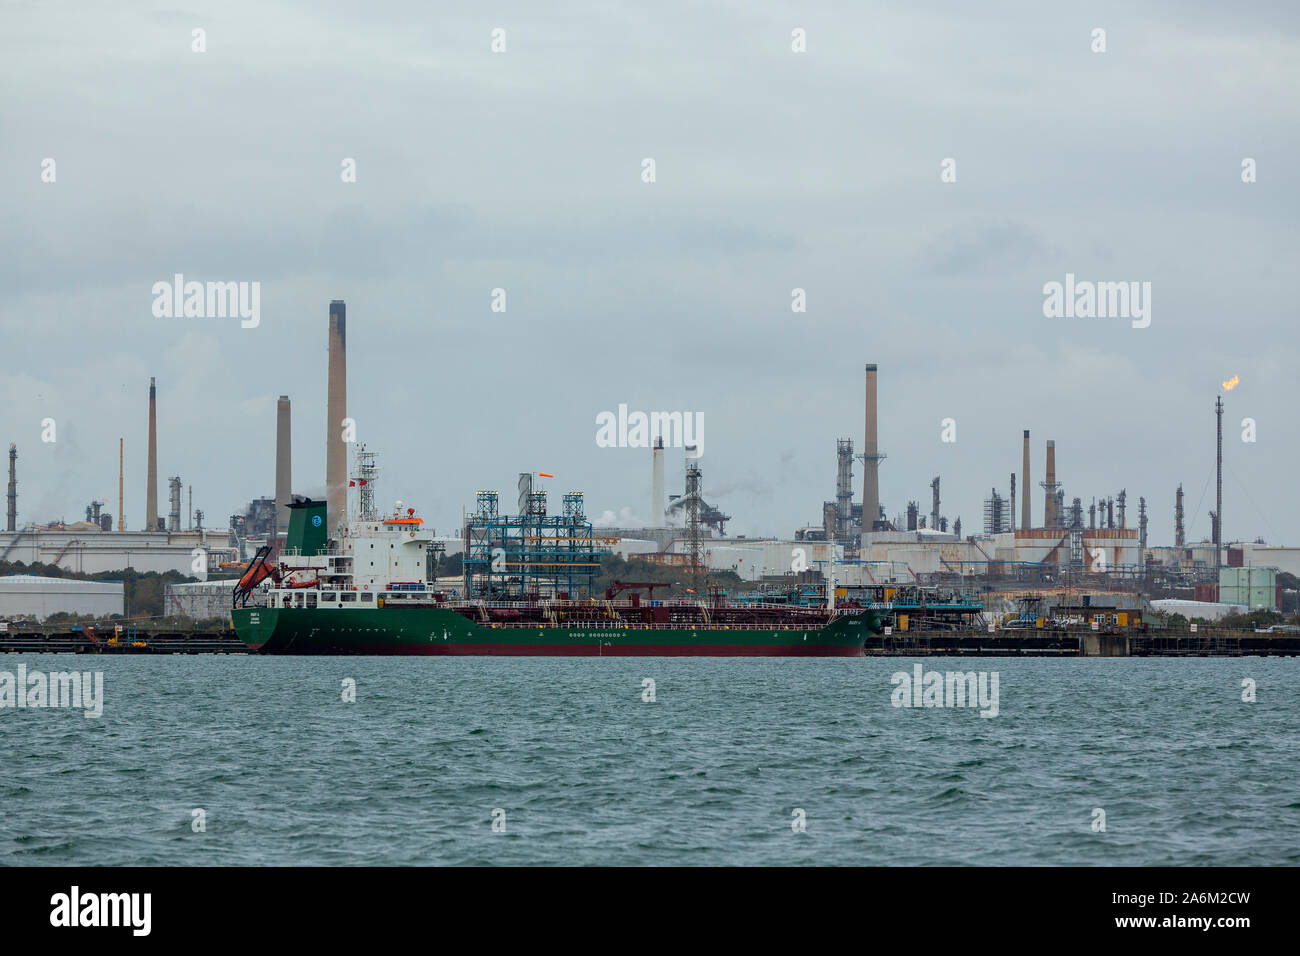 Super tanker Mary A birthed alongside the oil refinery at Fawley on Southampton water. Stock Photo